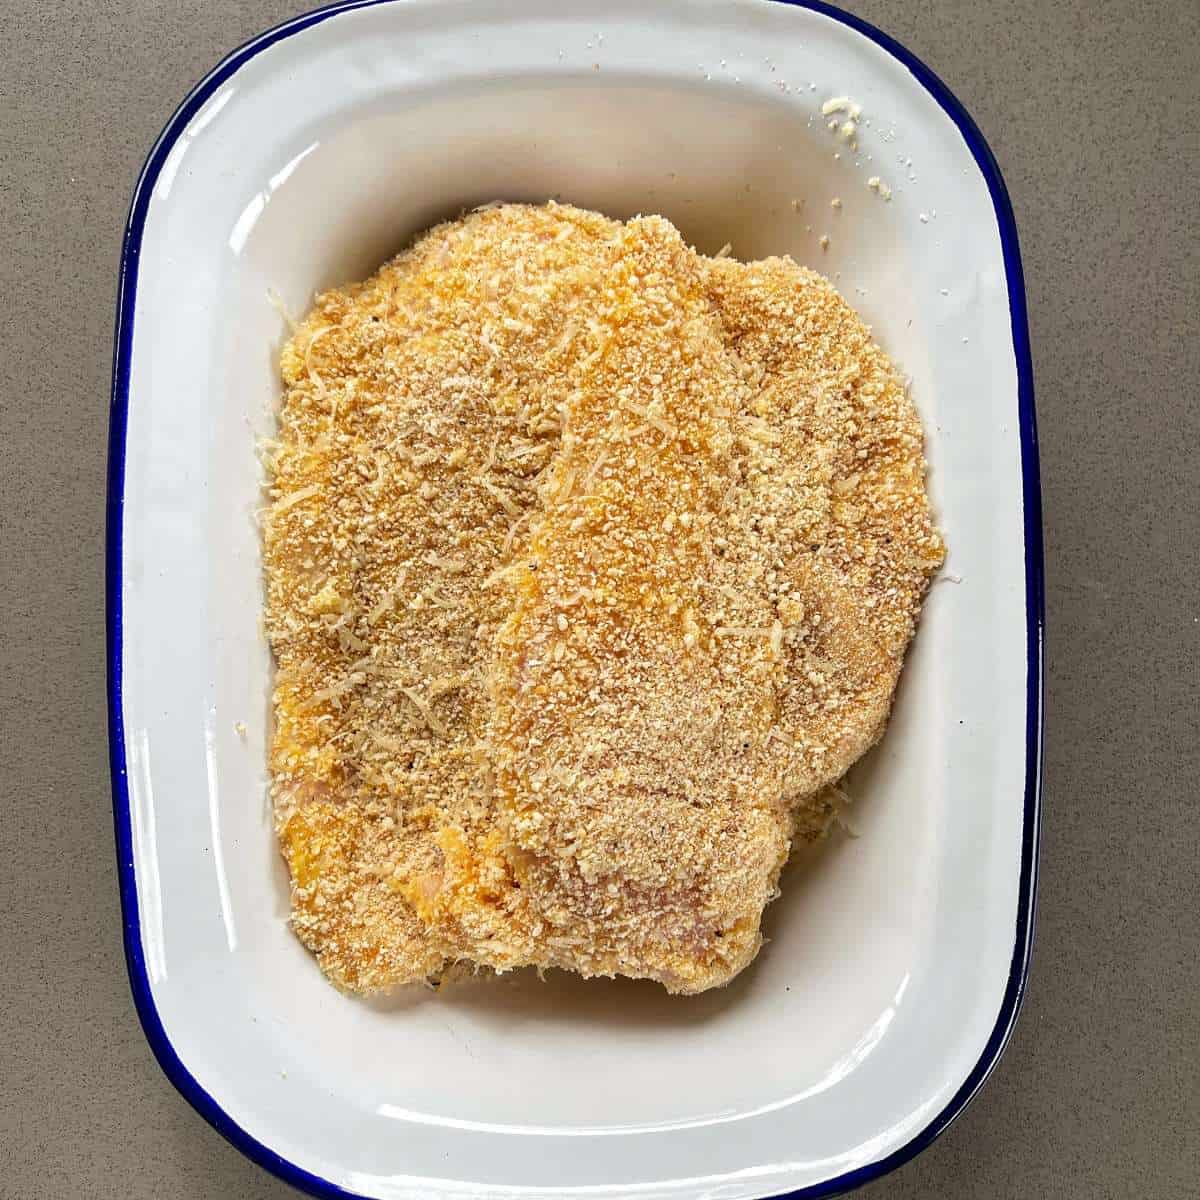 Crumbed chicken breast in a white dish sitting on a grey bench